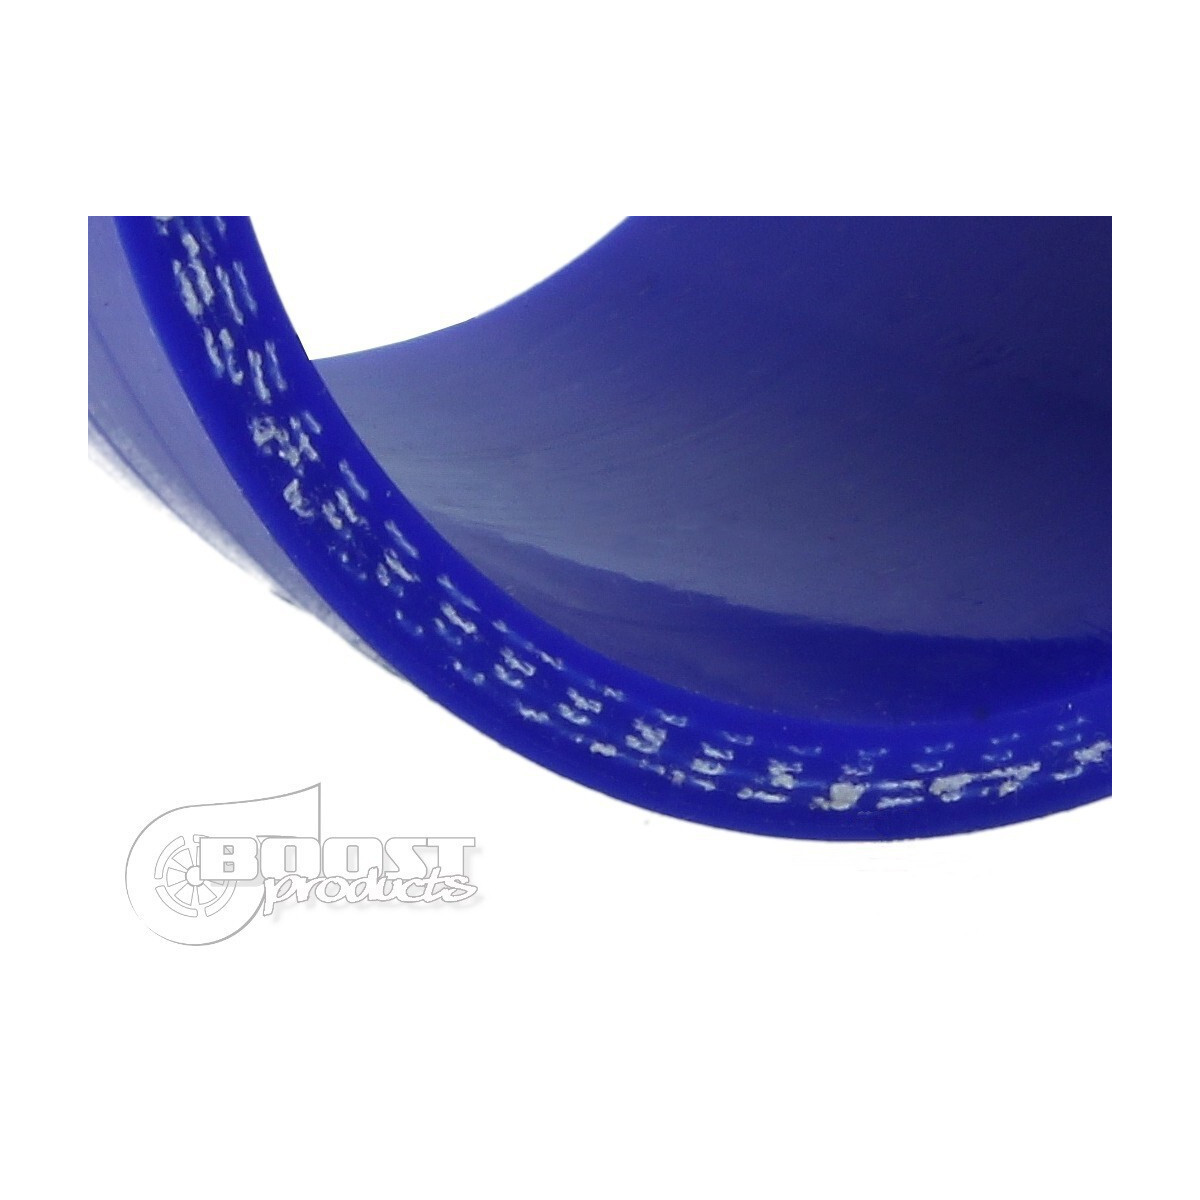 BOOST products Silicone Transition elbow 90°, 76 - 63mm, blue